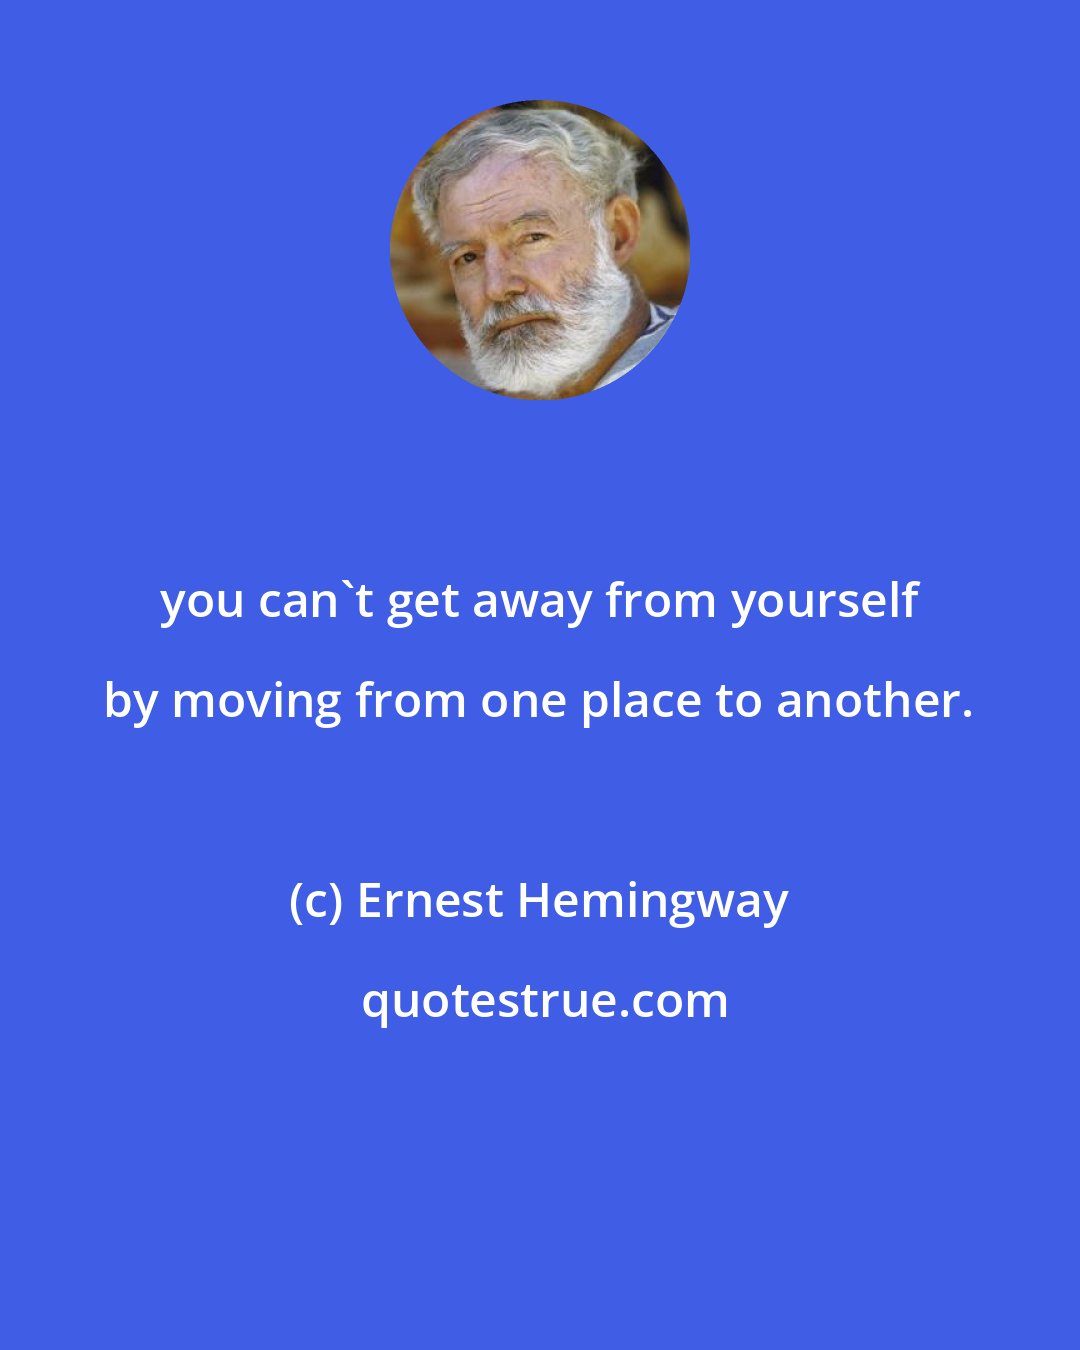 Ernest Hemingway: you can't get away from yourself by moving from one place to another.